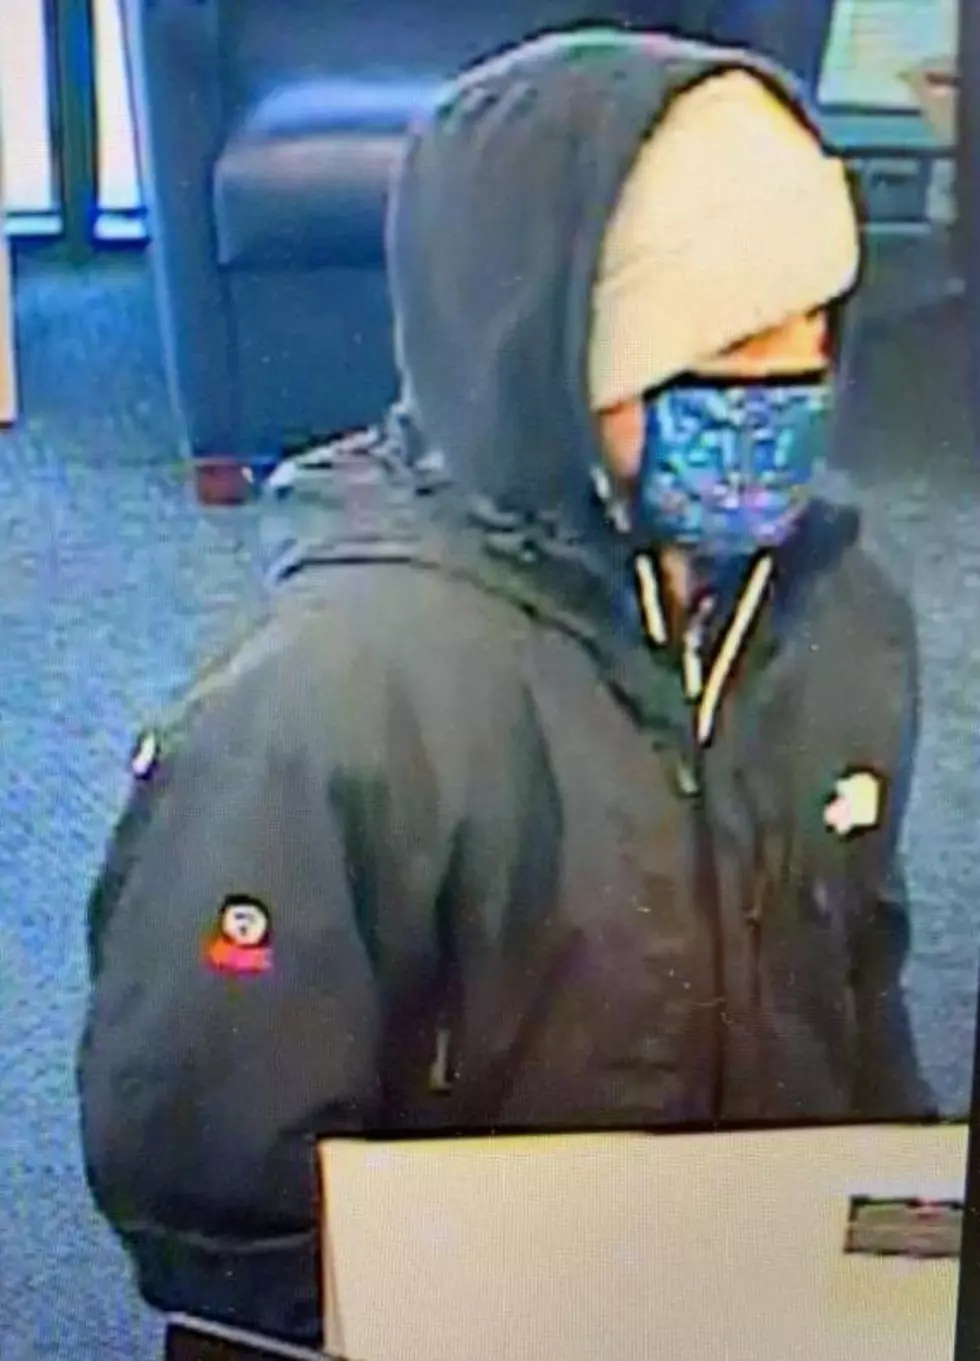 Your help is needed following brazen New Jersey bank robbery on Wednesday